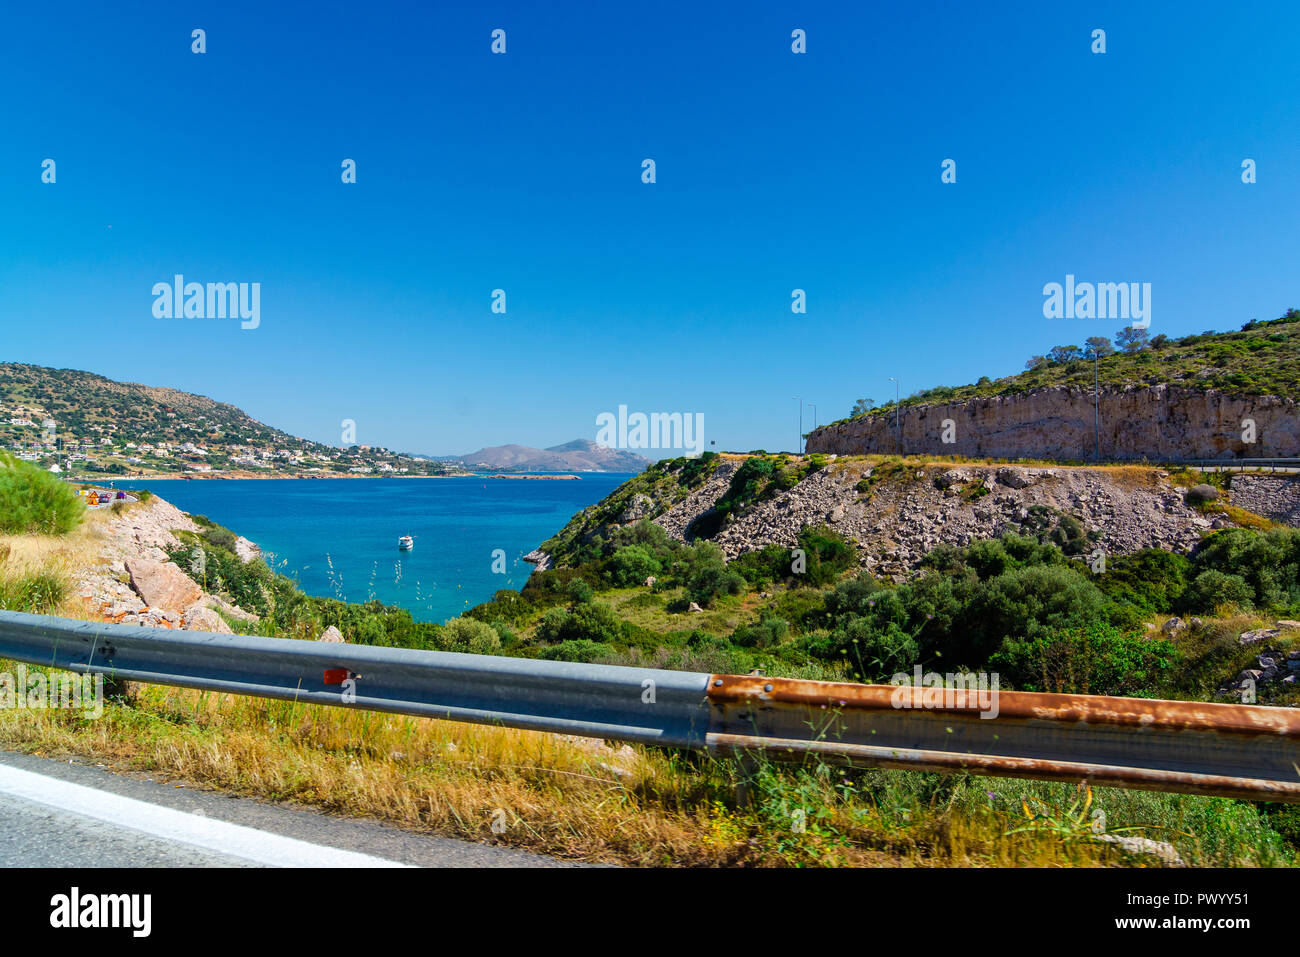 Traveling to Agia Marina, Greece a Place to travel at and View Wonderful Places Stock Photo